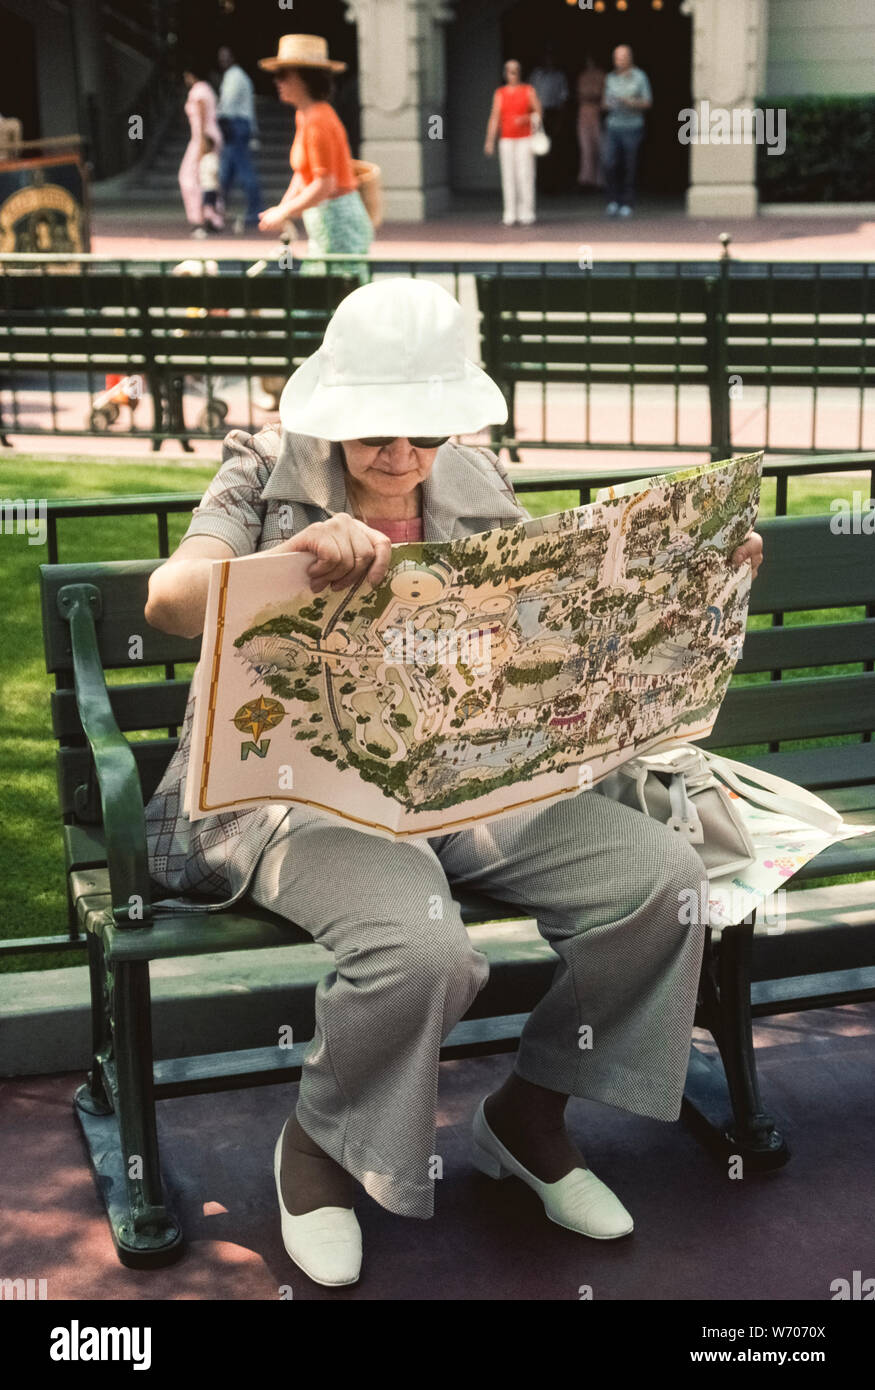 A senior female American visitor to Walt Disney World rests on an outdoor bench while pondering a large illustrated map that shows four theme parks within the world-famous Disney amusement complex near Orlando in Florida, USA. She's trying to decide which one to explore: the Magic Kingdom, Epcot, the Animal Kingdom or Disney's Hollywood Studios. Since opening in 1971, Disney World has become an icon of American culture and is now the most popular vacation resort in the world with more than 52 million visitors annually. Stock Photo